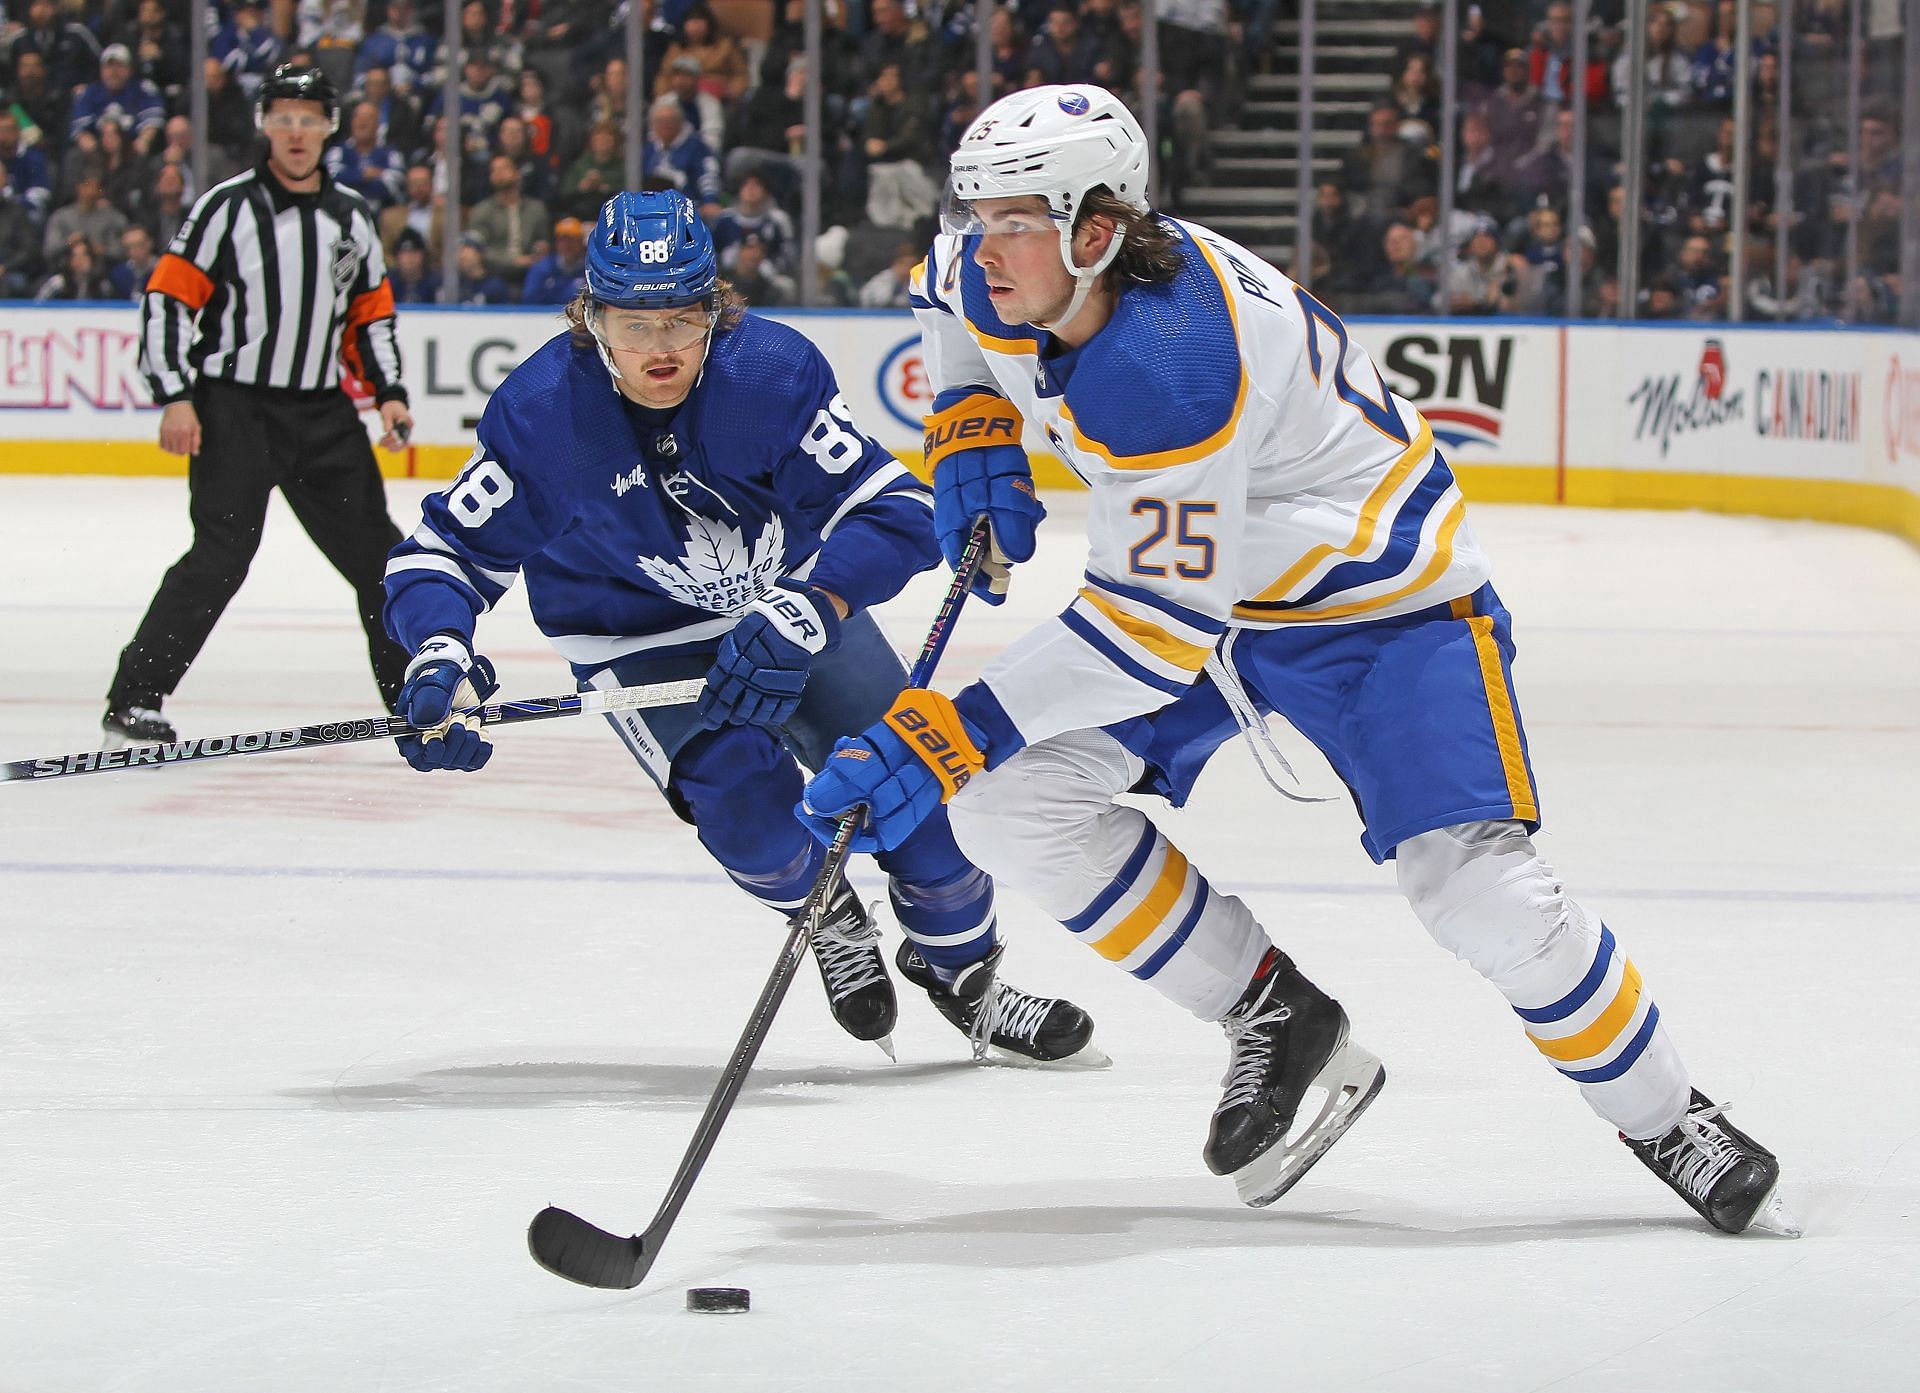 Owen Power #25 of the Buffalo Sabres skates with the puck against William Nylander #88 of the Toronto Maple Leafs